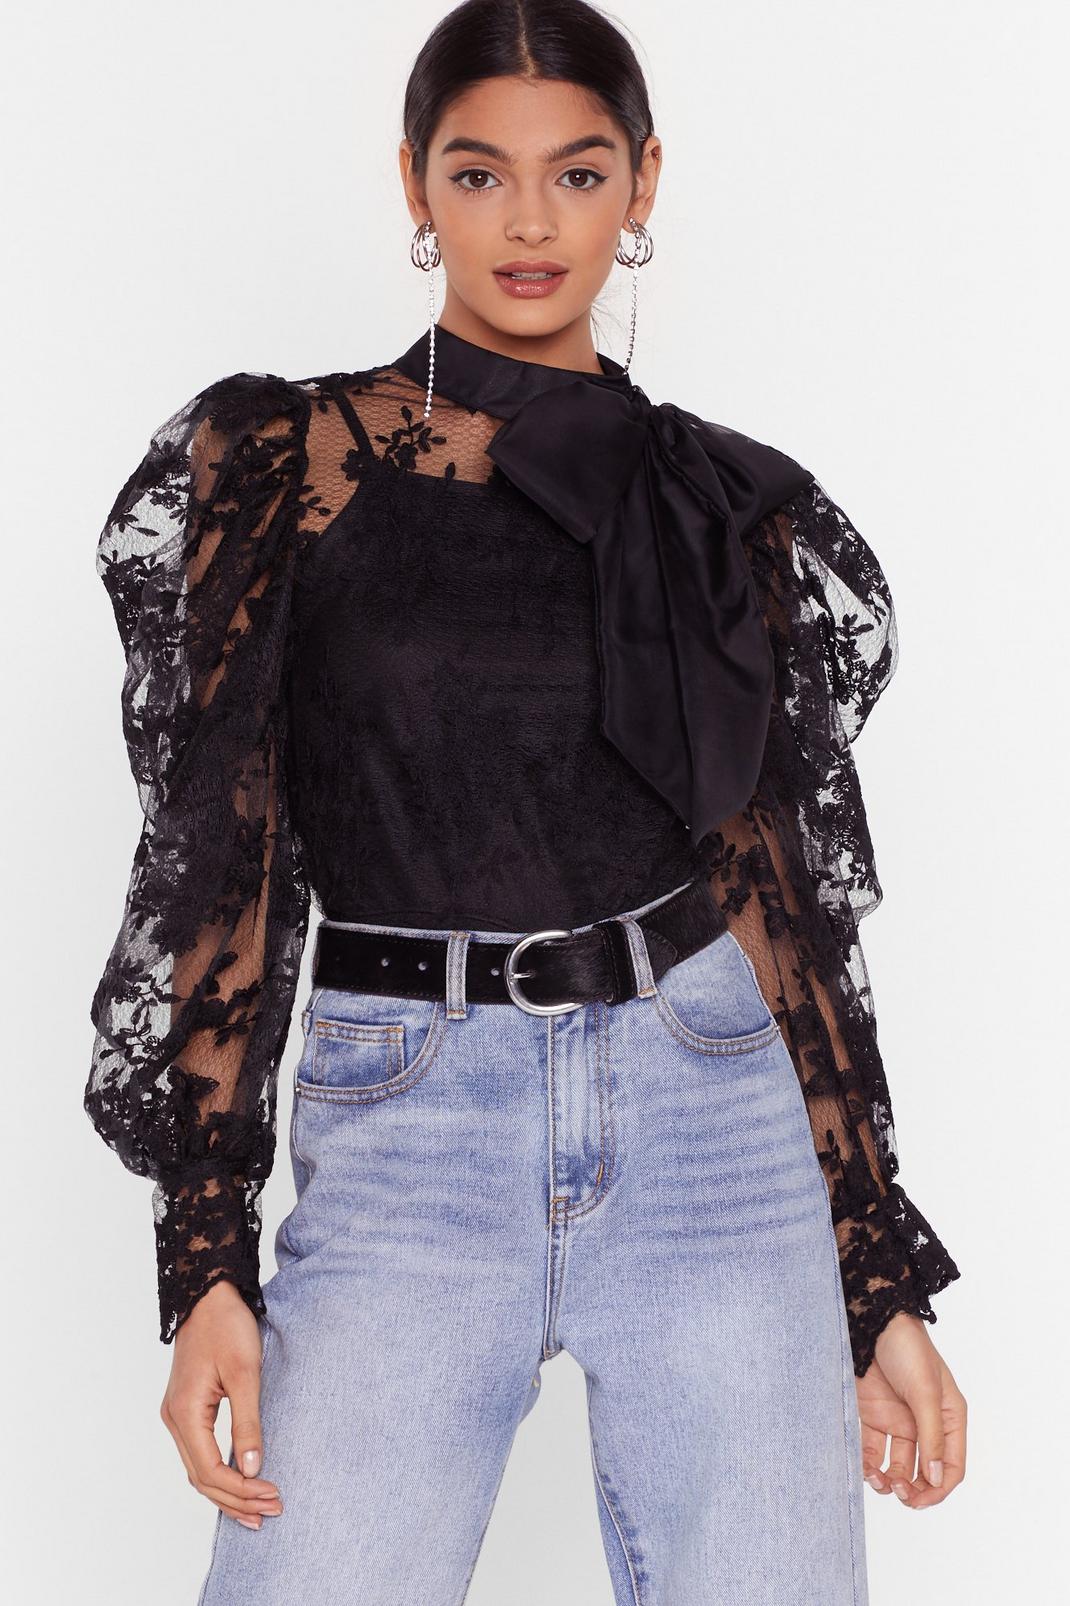 Win the Lace Puff Sleeve Pussybow Top